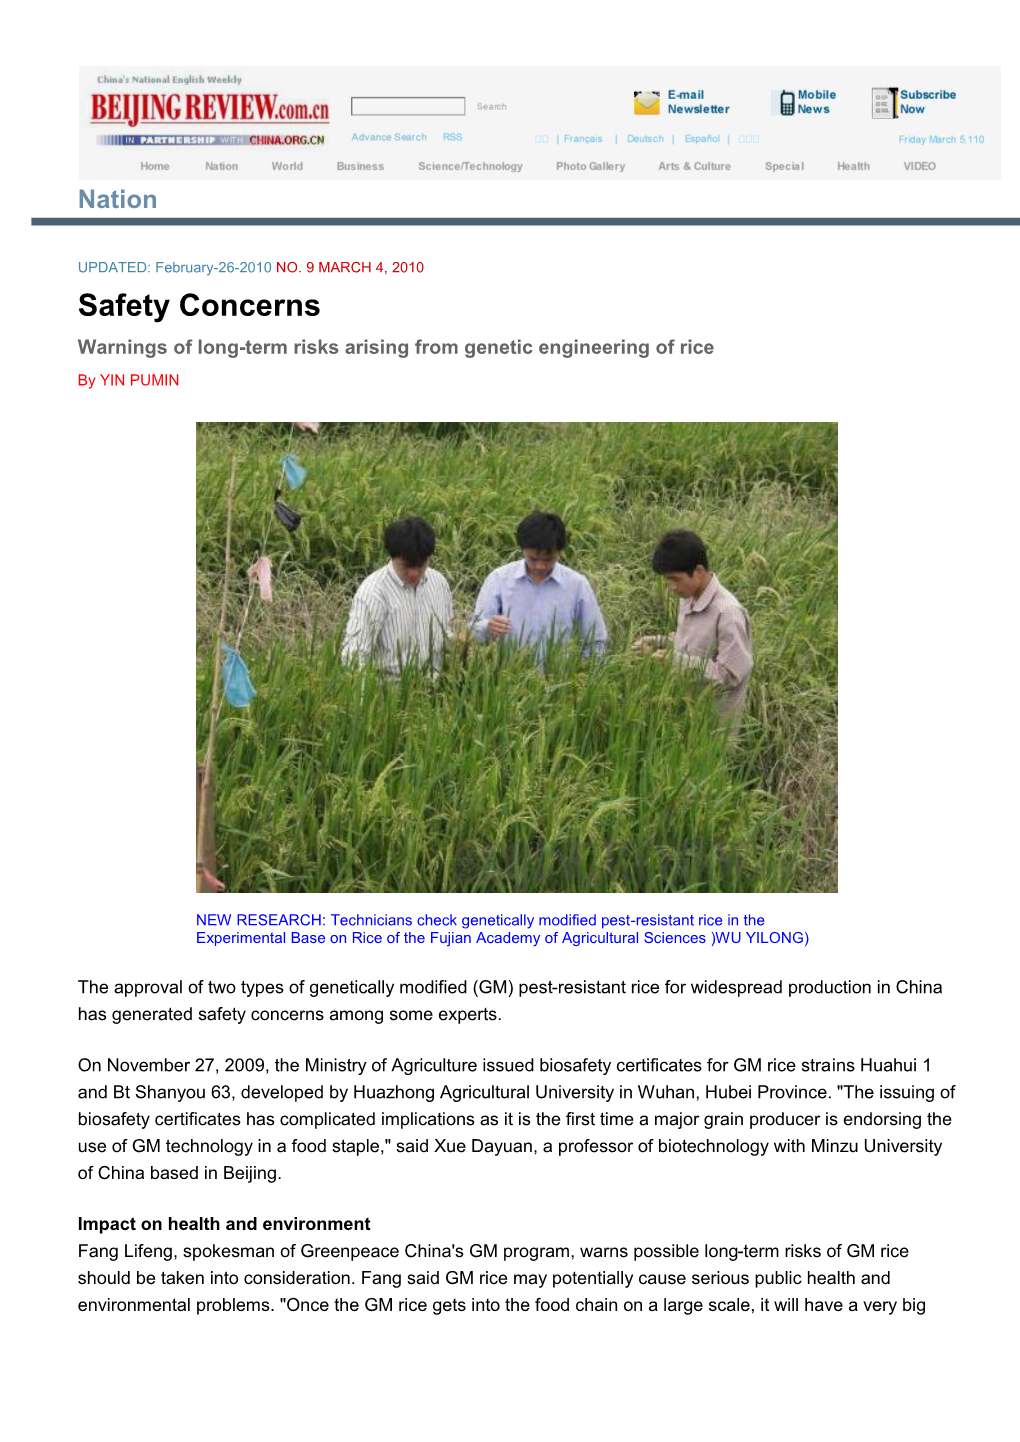 Safety Concerns Warnings of Long-Term Risks Arising from Genetic Engineering of Rice by YIN PUMIN